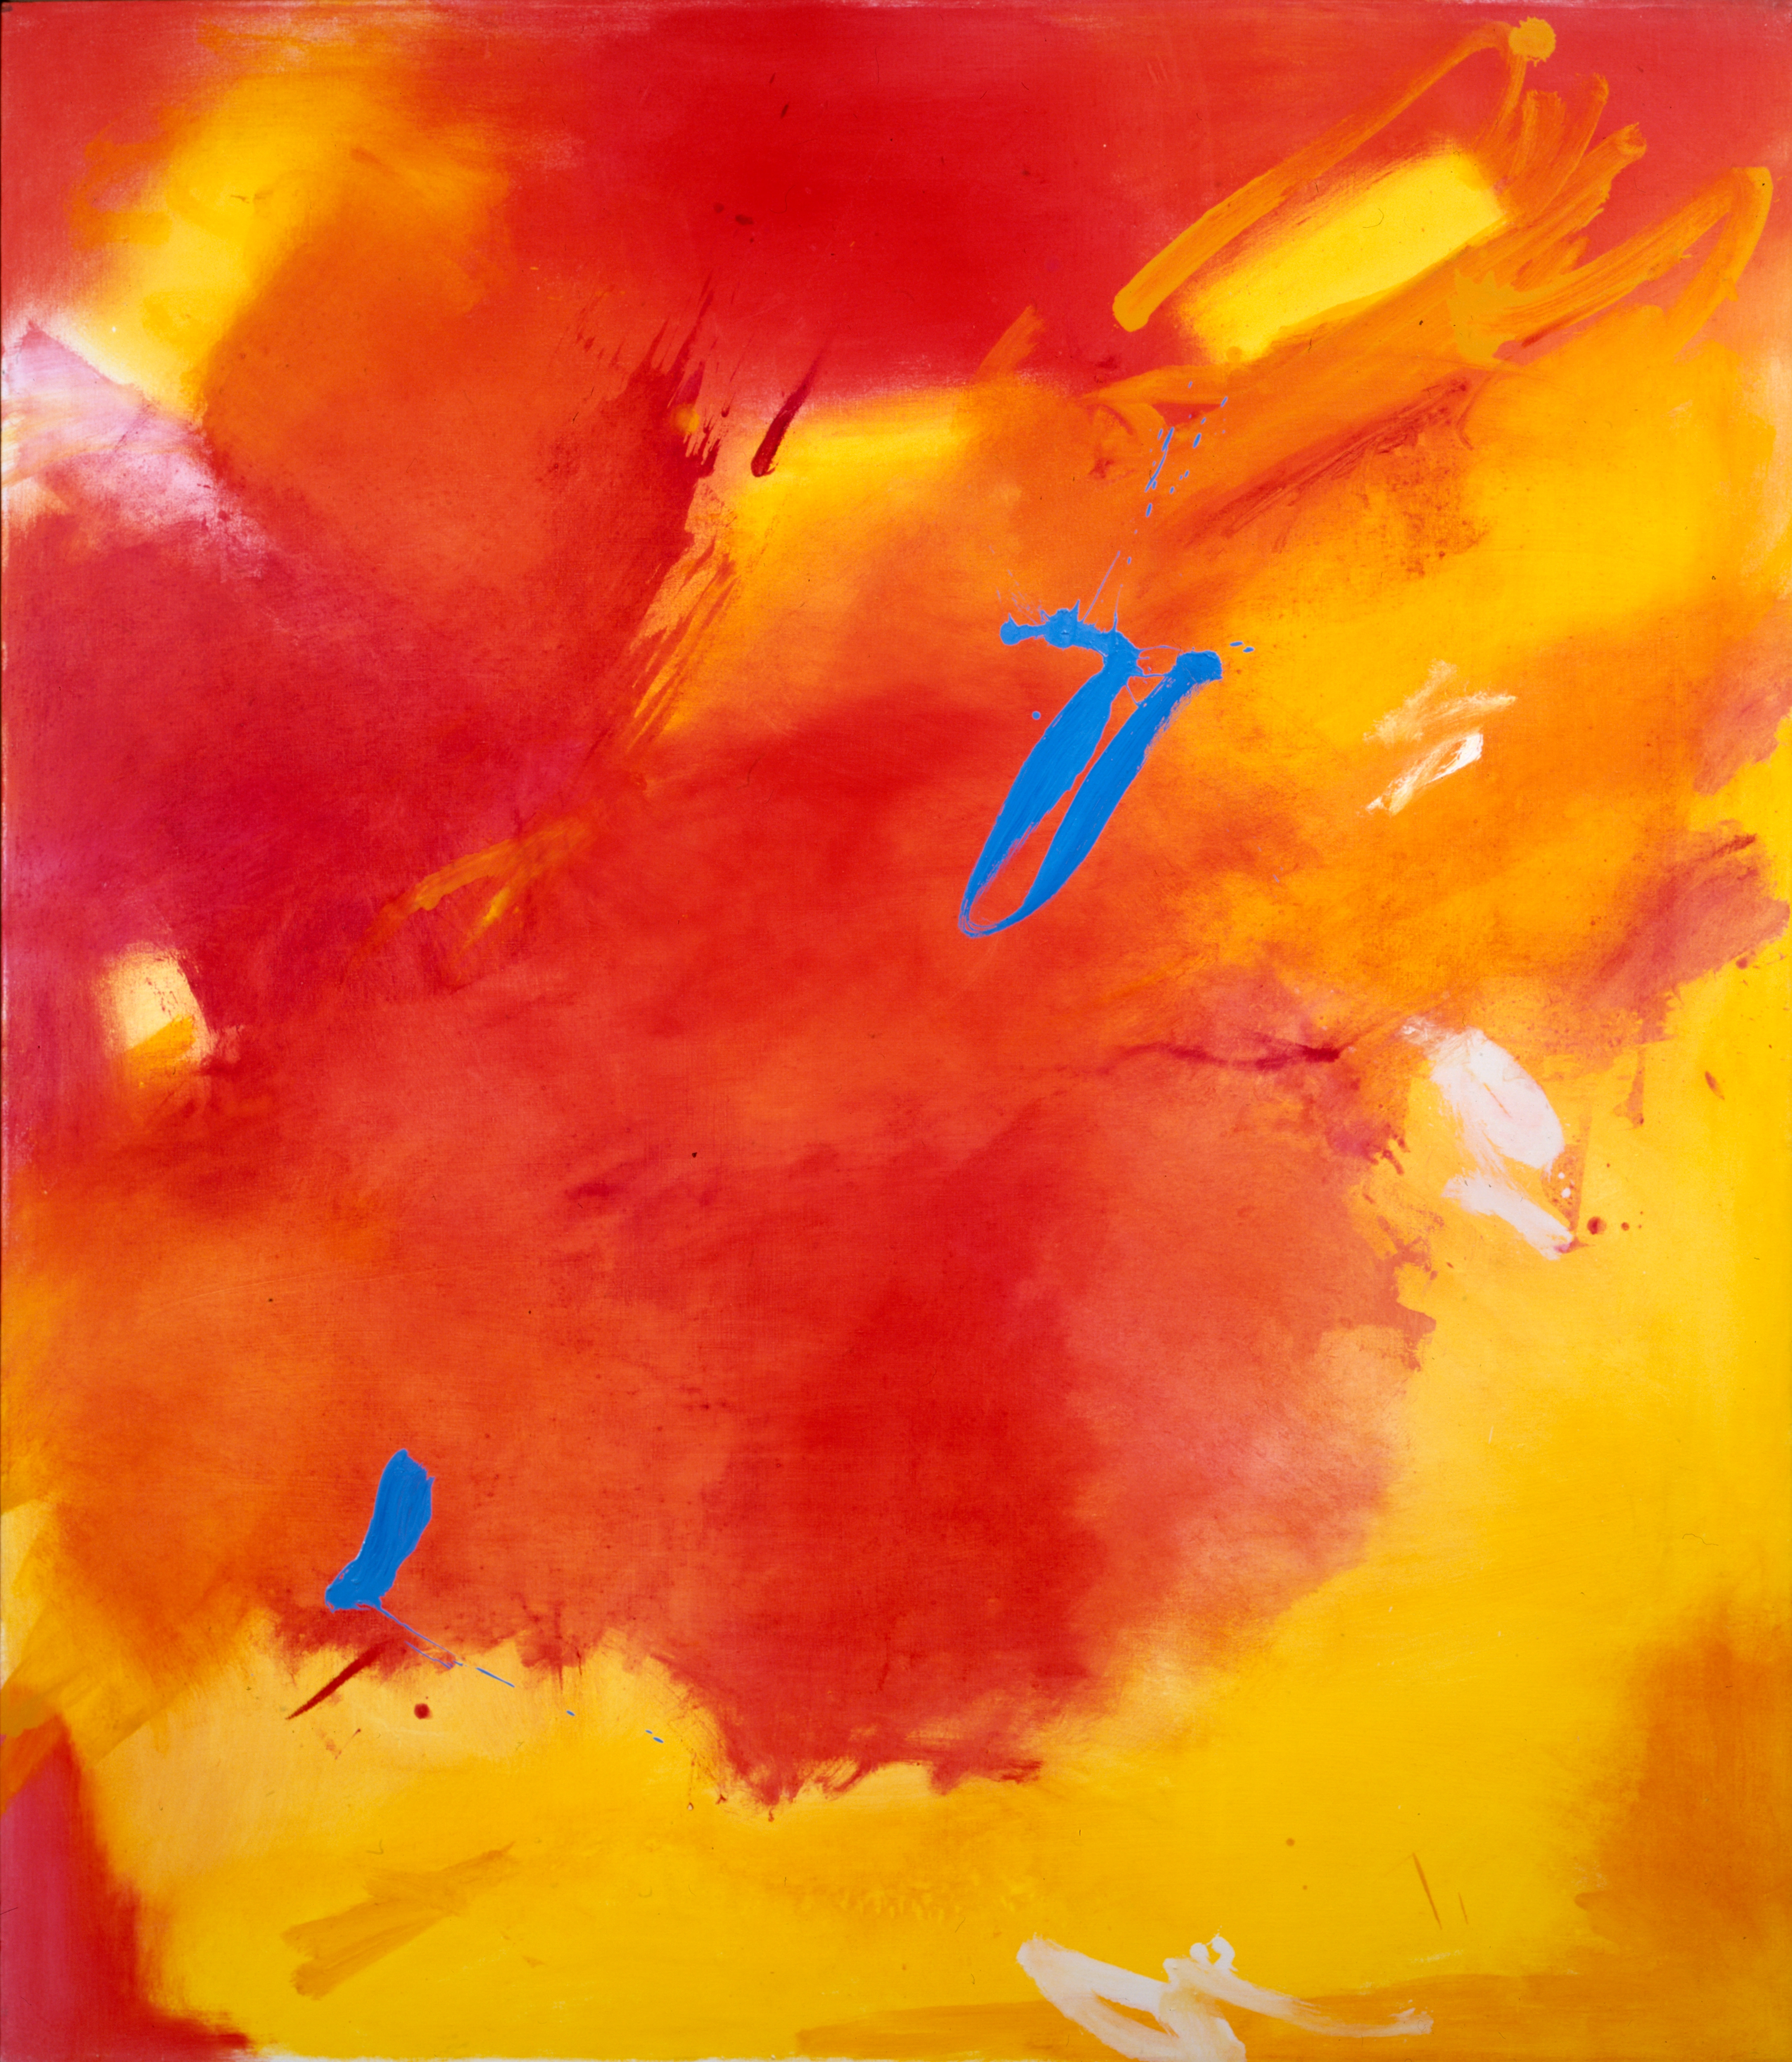 Abstract oil painting made with energetic brushstrokes of bright yellow, reds, and red-oranges. A "v" shape of blue paint punctuated the center, and a mark of the same blue color appeared towards the bottom left.